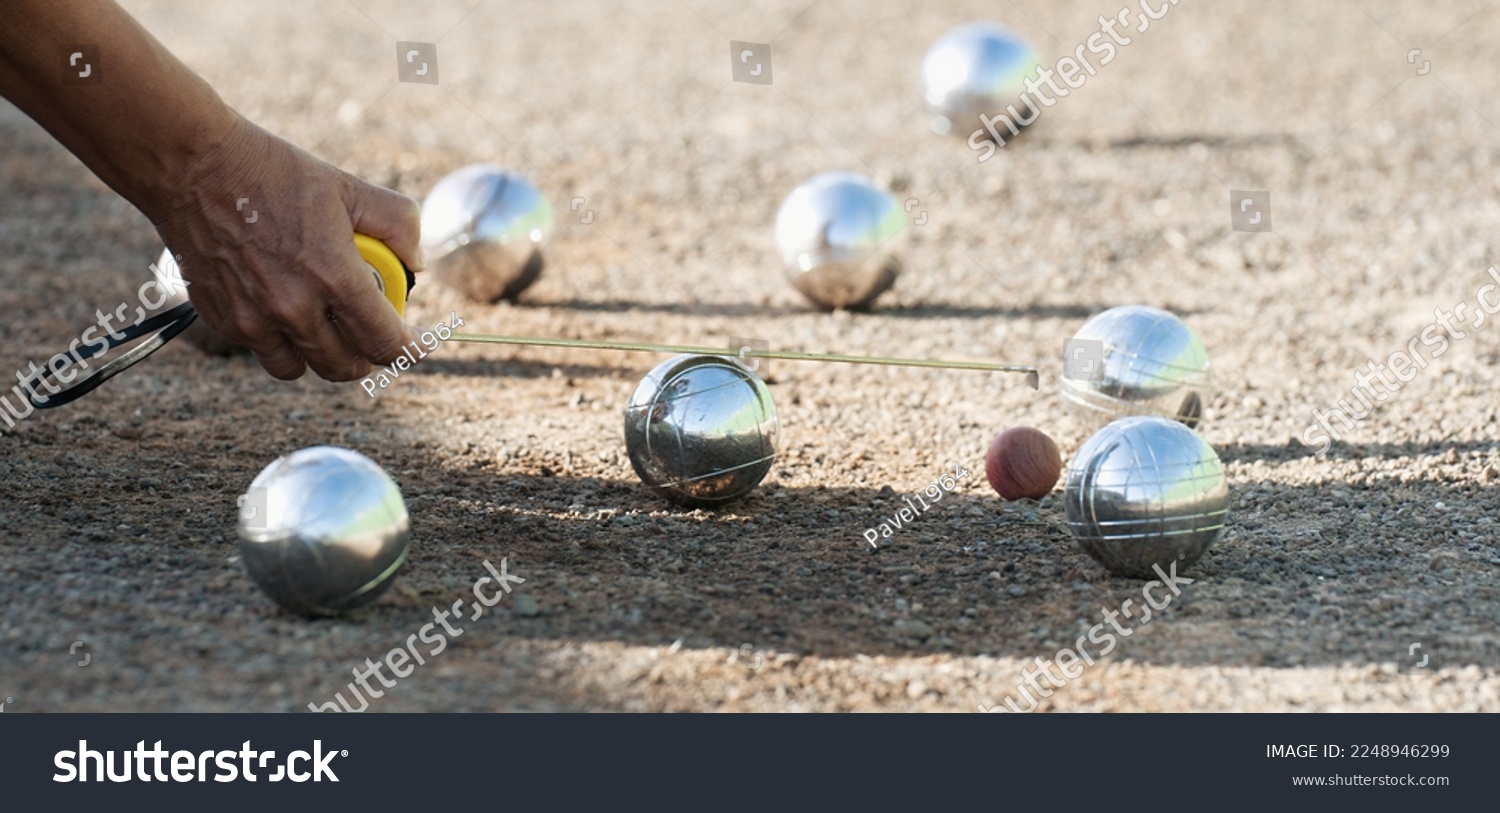 Petanque game, woman measuring the distance of petanque ball in petanque field, deciding who's the winner #2248946299